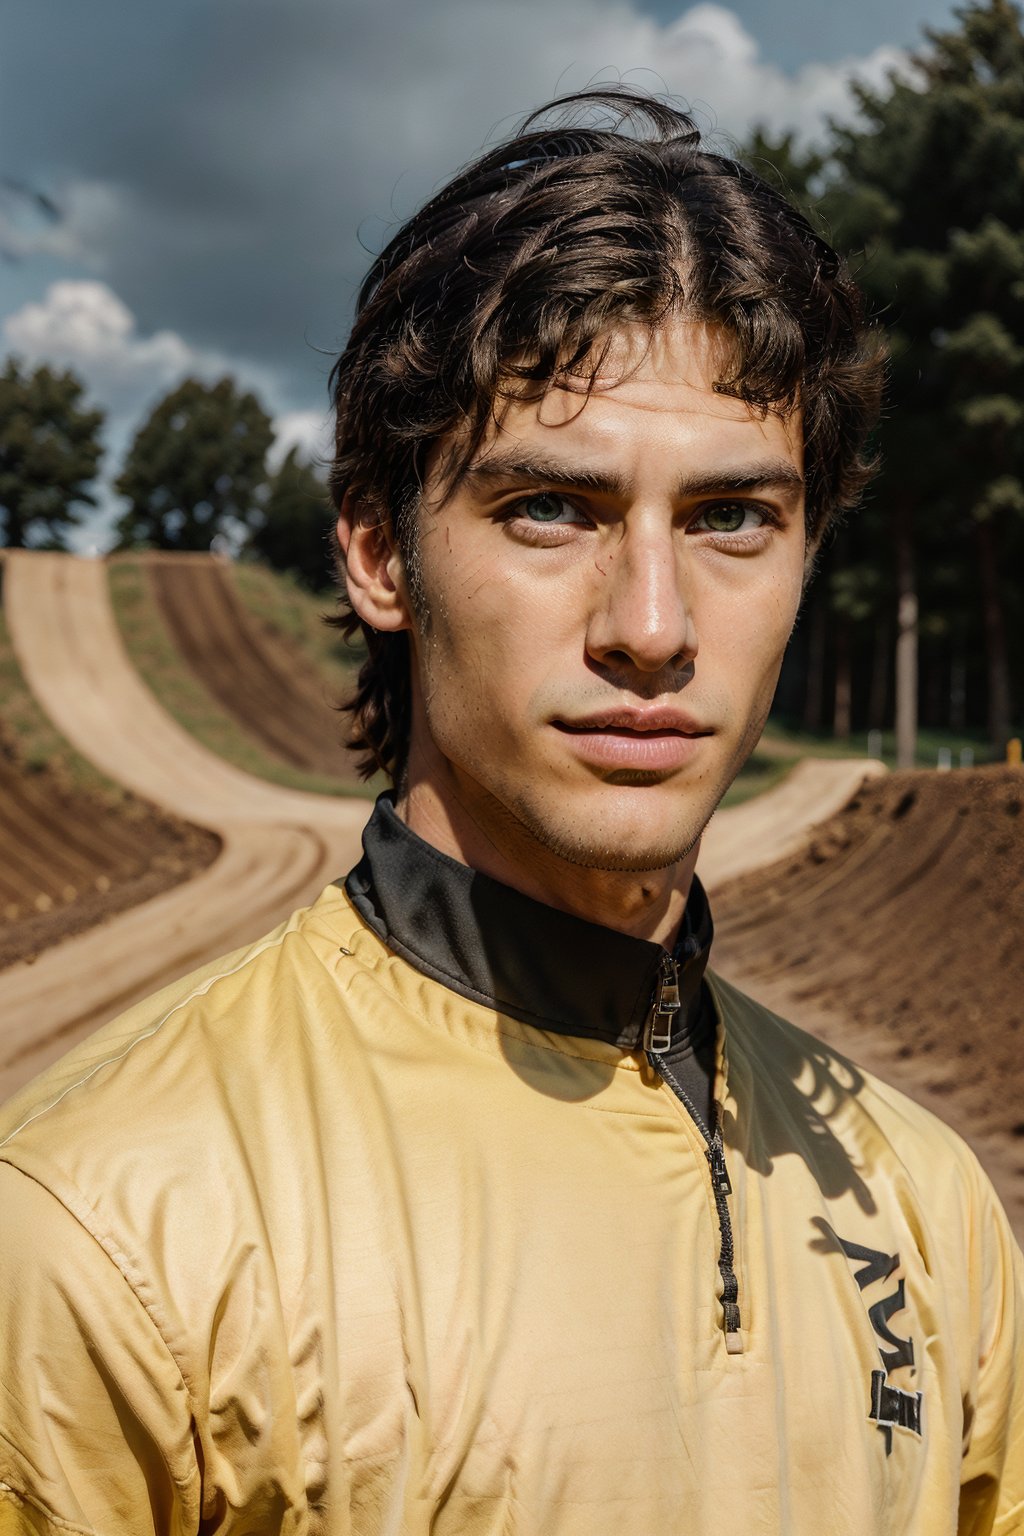 Hyper realistic image of an athletic looking Caucasian man dressed biker yellow uniform. ((The uniform yellow Fox Racing Sports whit Logos: 1.2)). The character should have detailed skin texture, well-defined hands, and hazel eyes that reflect realism. His face should show symmetry in his physical features, and he should have a serious but friendly expression. When standing, the lighting in the scene should be natural and realistic, with a medium shot that shows the character centered in the frame, (looking directly at the viewer: 1.2). ((Also, make sure his entire body is facing the viewer to create a sense of connection: 1.6)).
(Fund of a BMX track: 1.6)